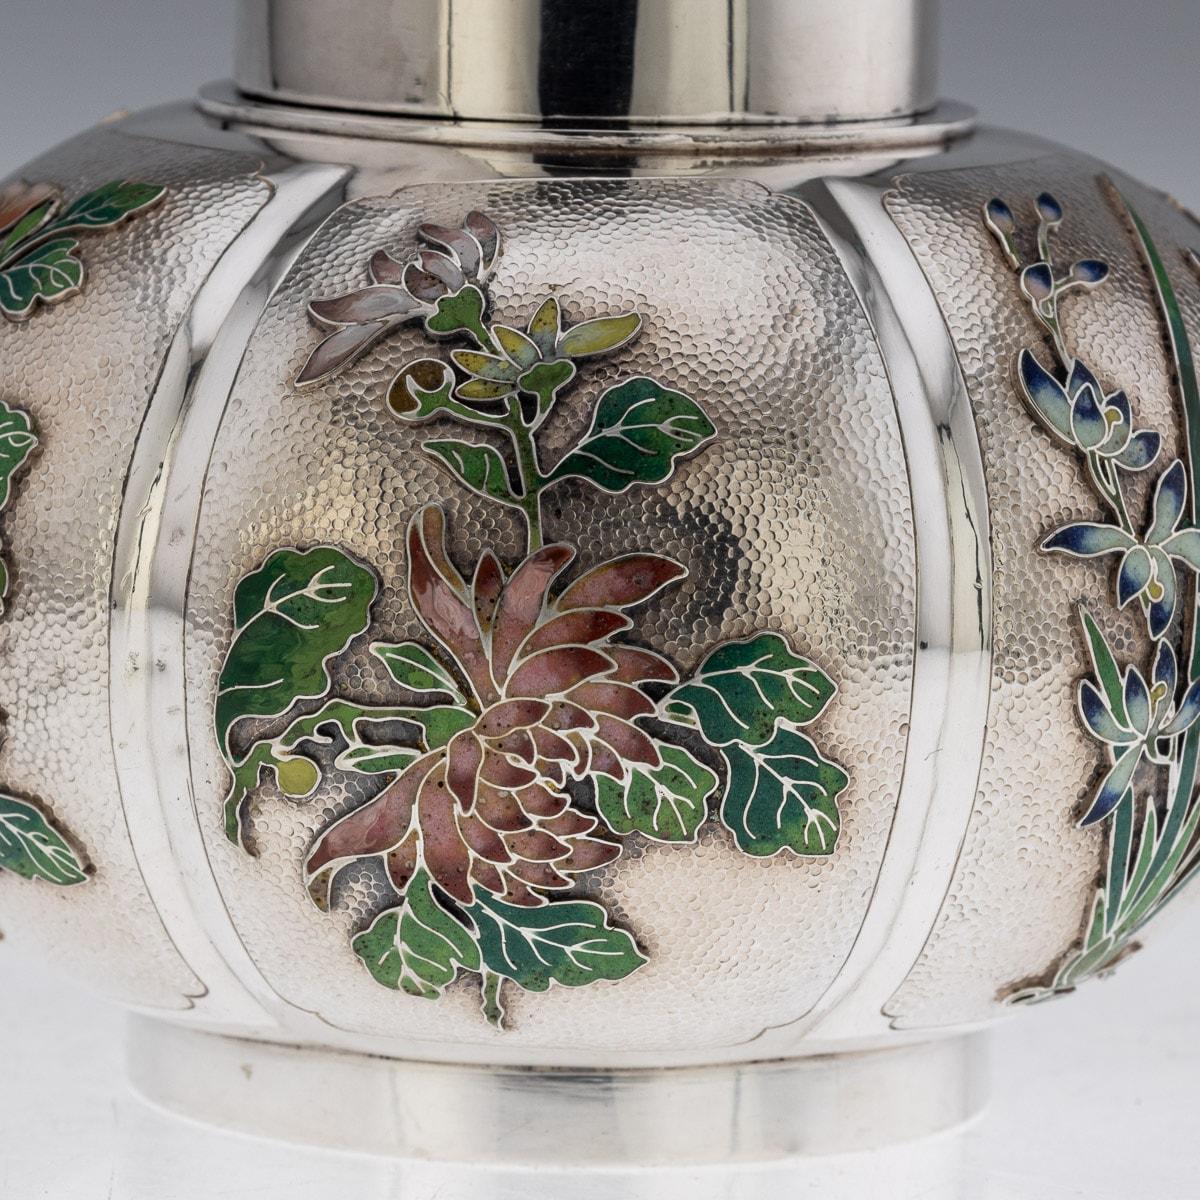 20th Century Chinese Export Solid Silver & Enamel Tea Caddy, Luen Wo, c.1900 12